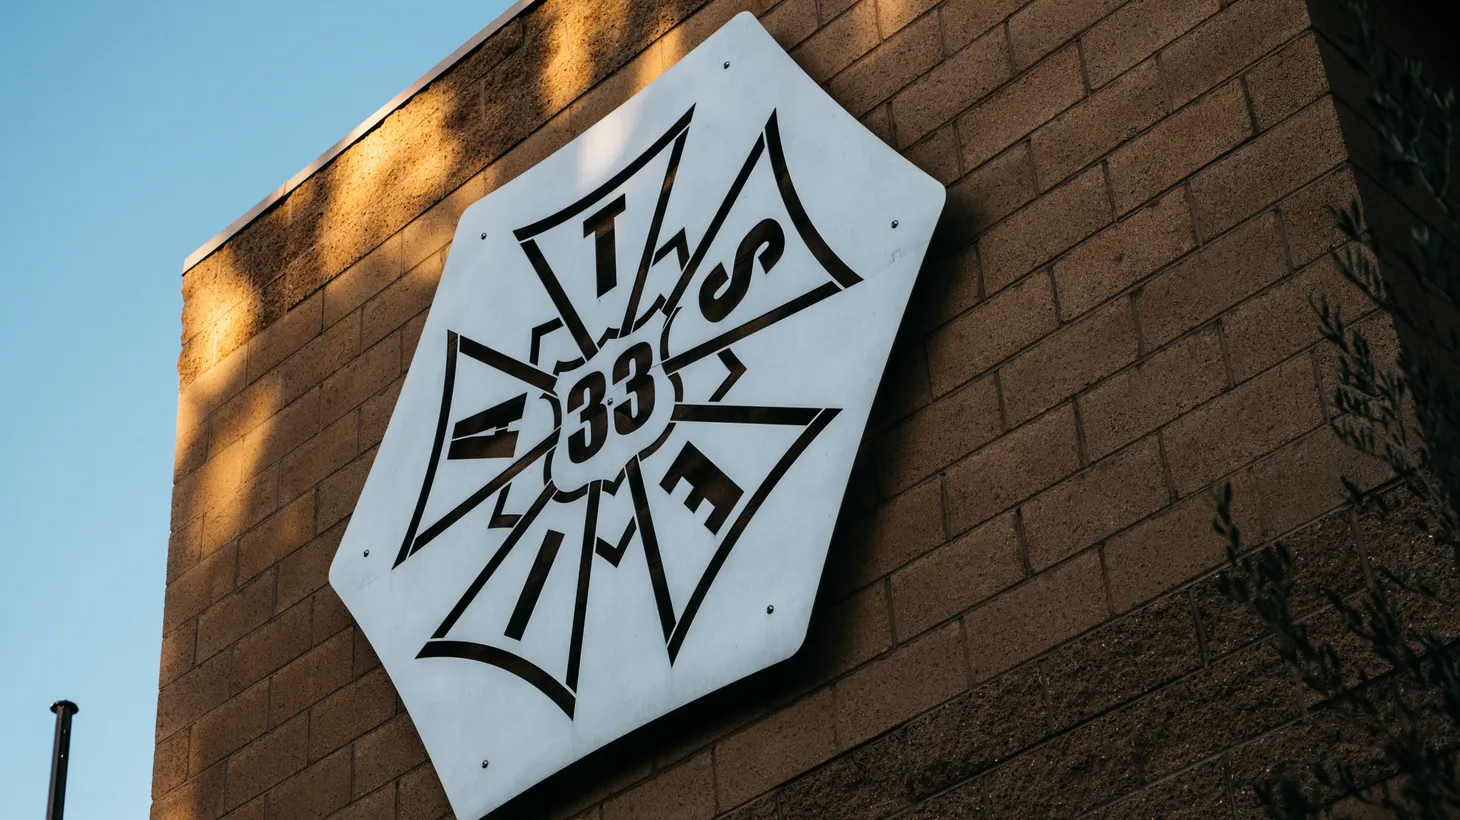 This IATSE building is located in Burbank, CA.